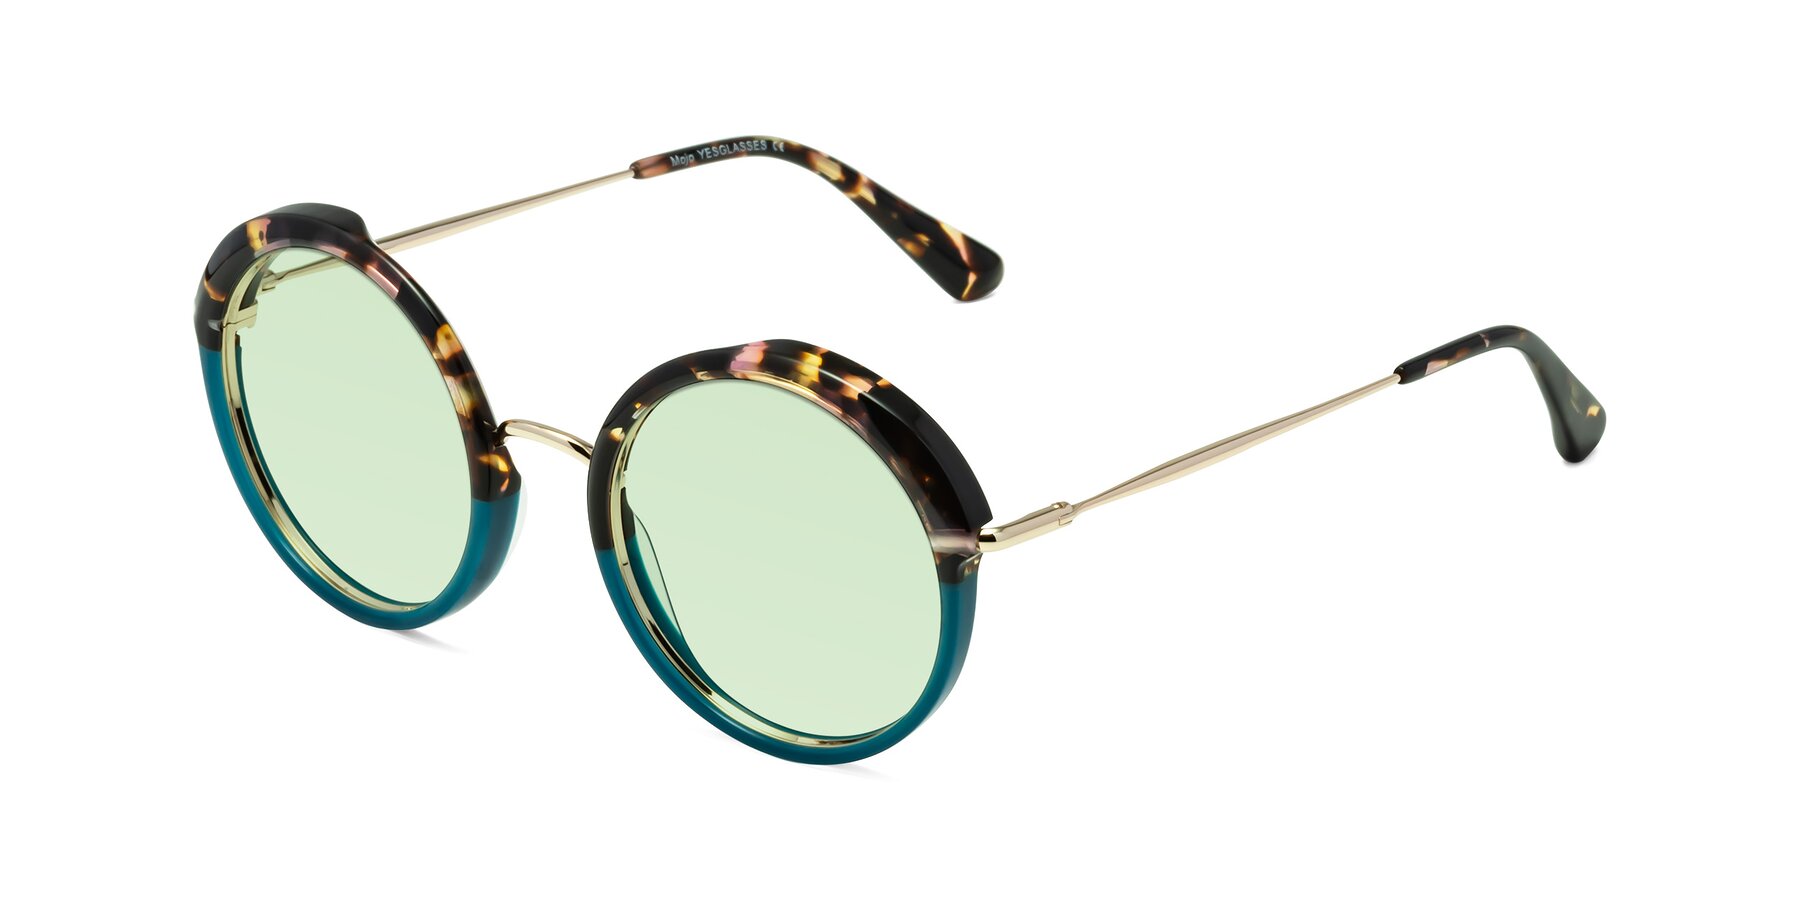 Angle of Mojo in Floral-Teal with Light Green Tinted Lenses